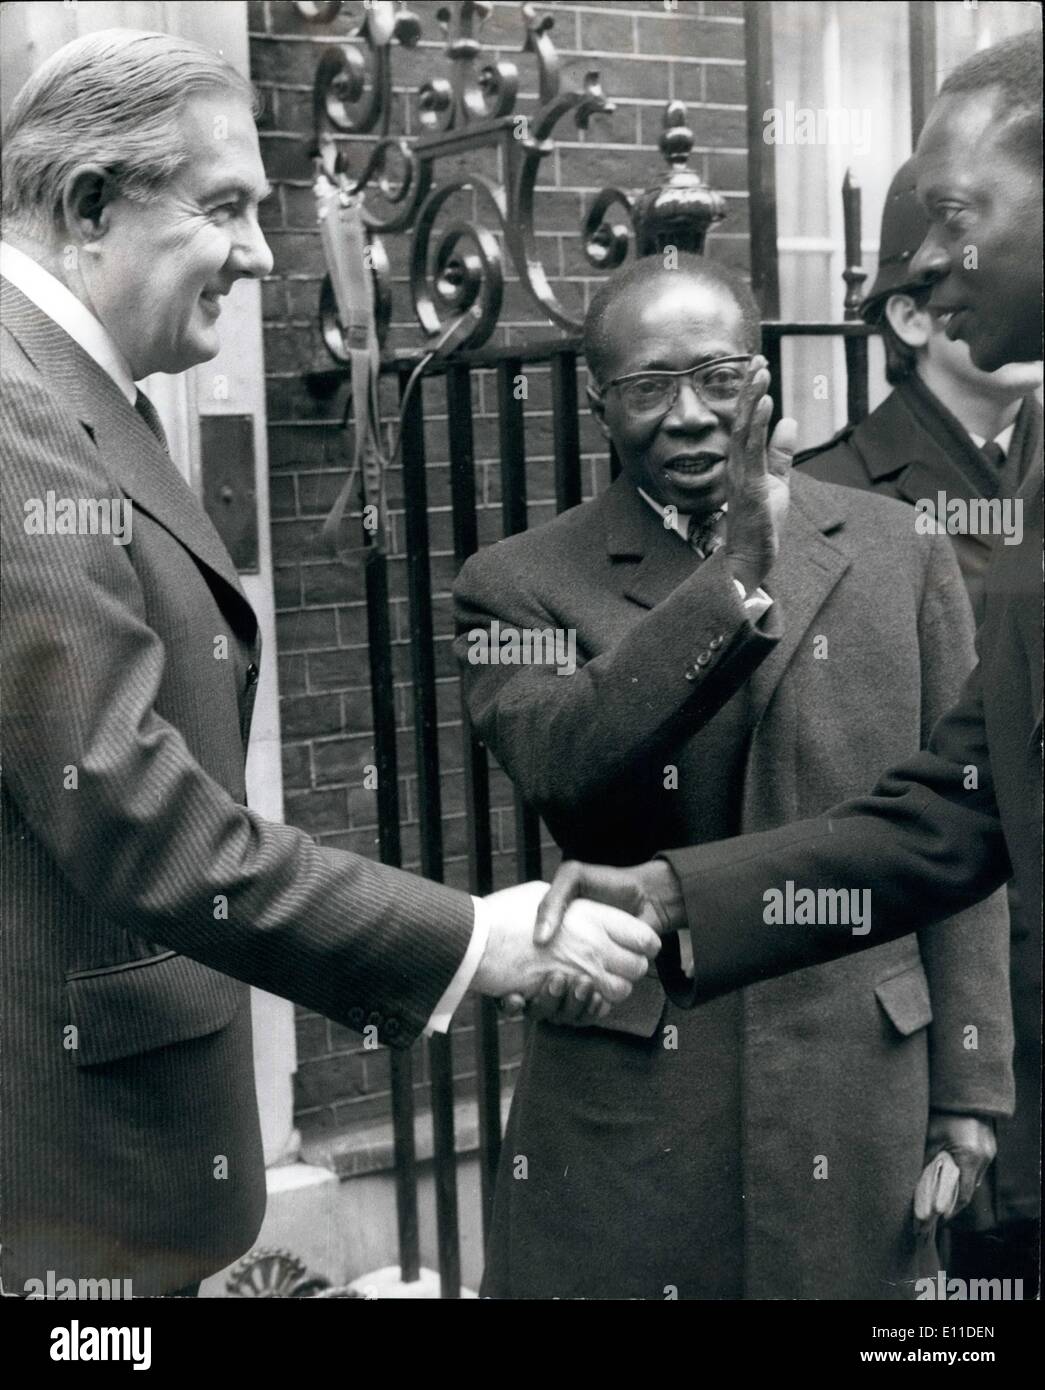 Mar. 03, 1977 - President Senghor of Senegal has Lunch with the Prime Minister: The President of Senegal who is in London for a Stock Photo